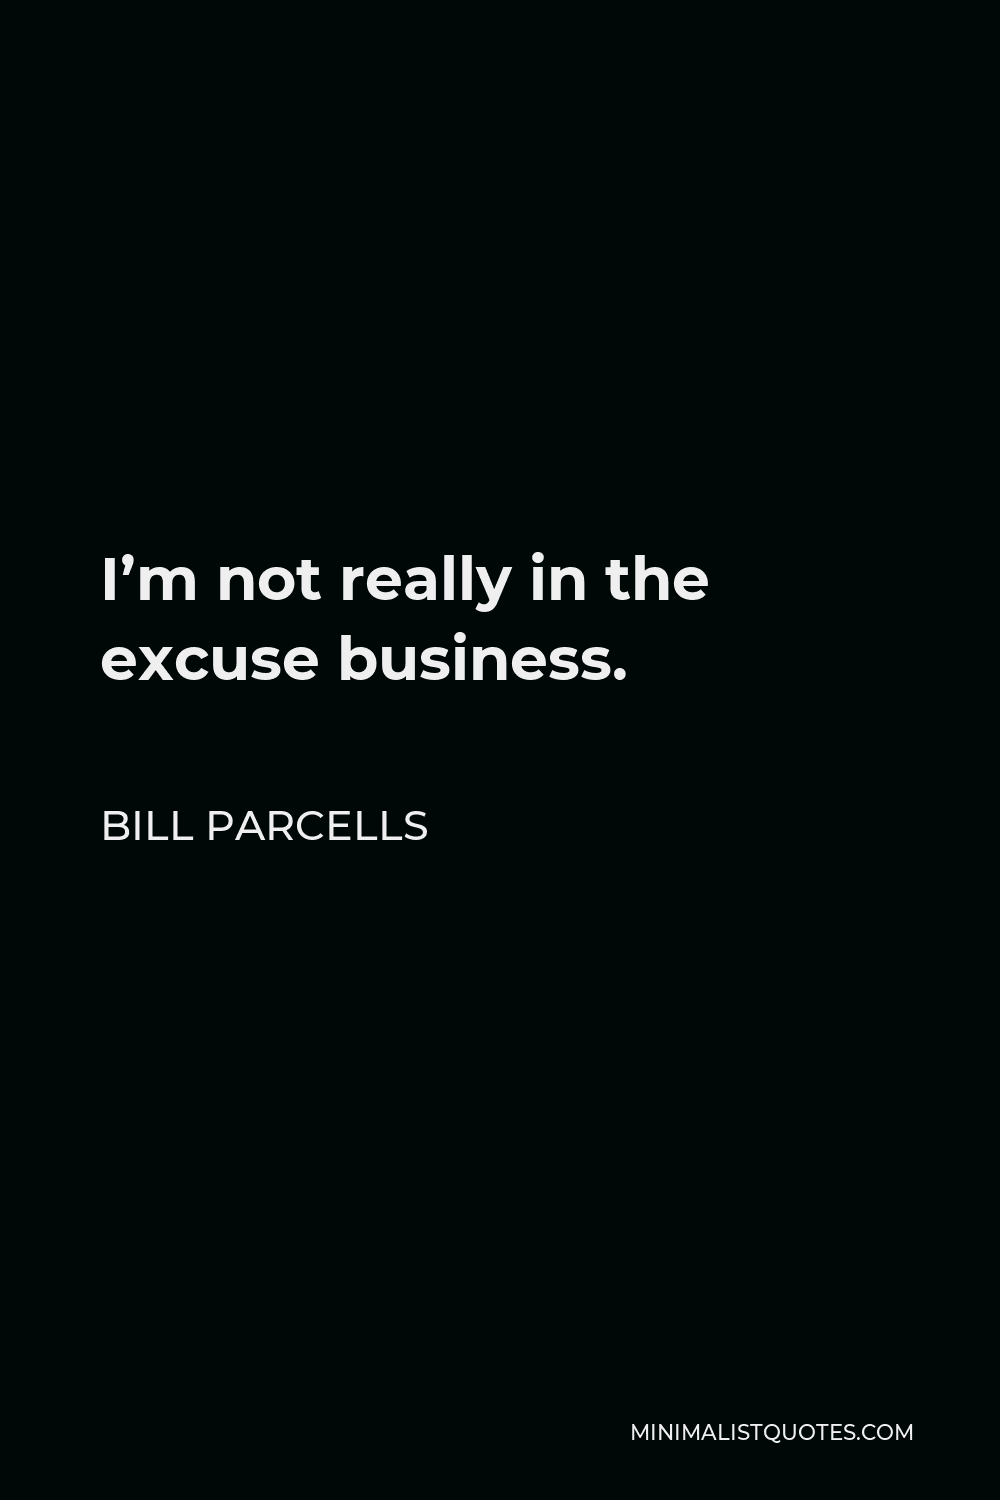 Bill Parcells Quote - I’m not really in the excuse business.